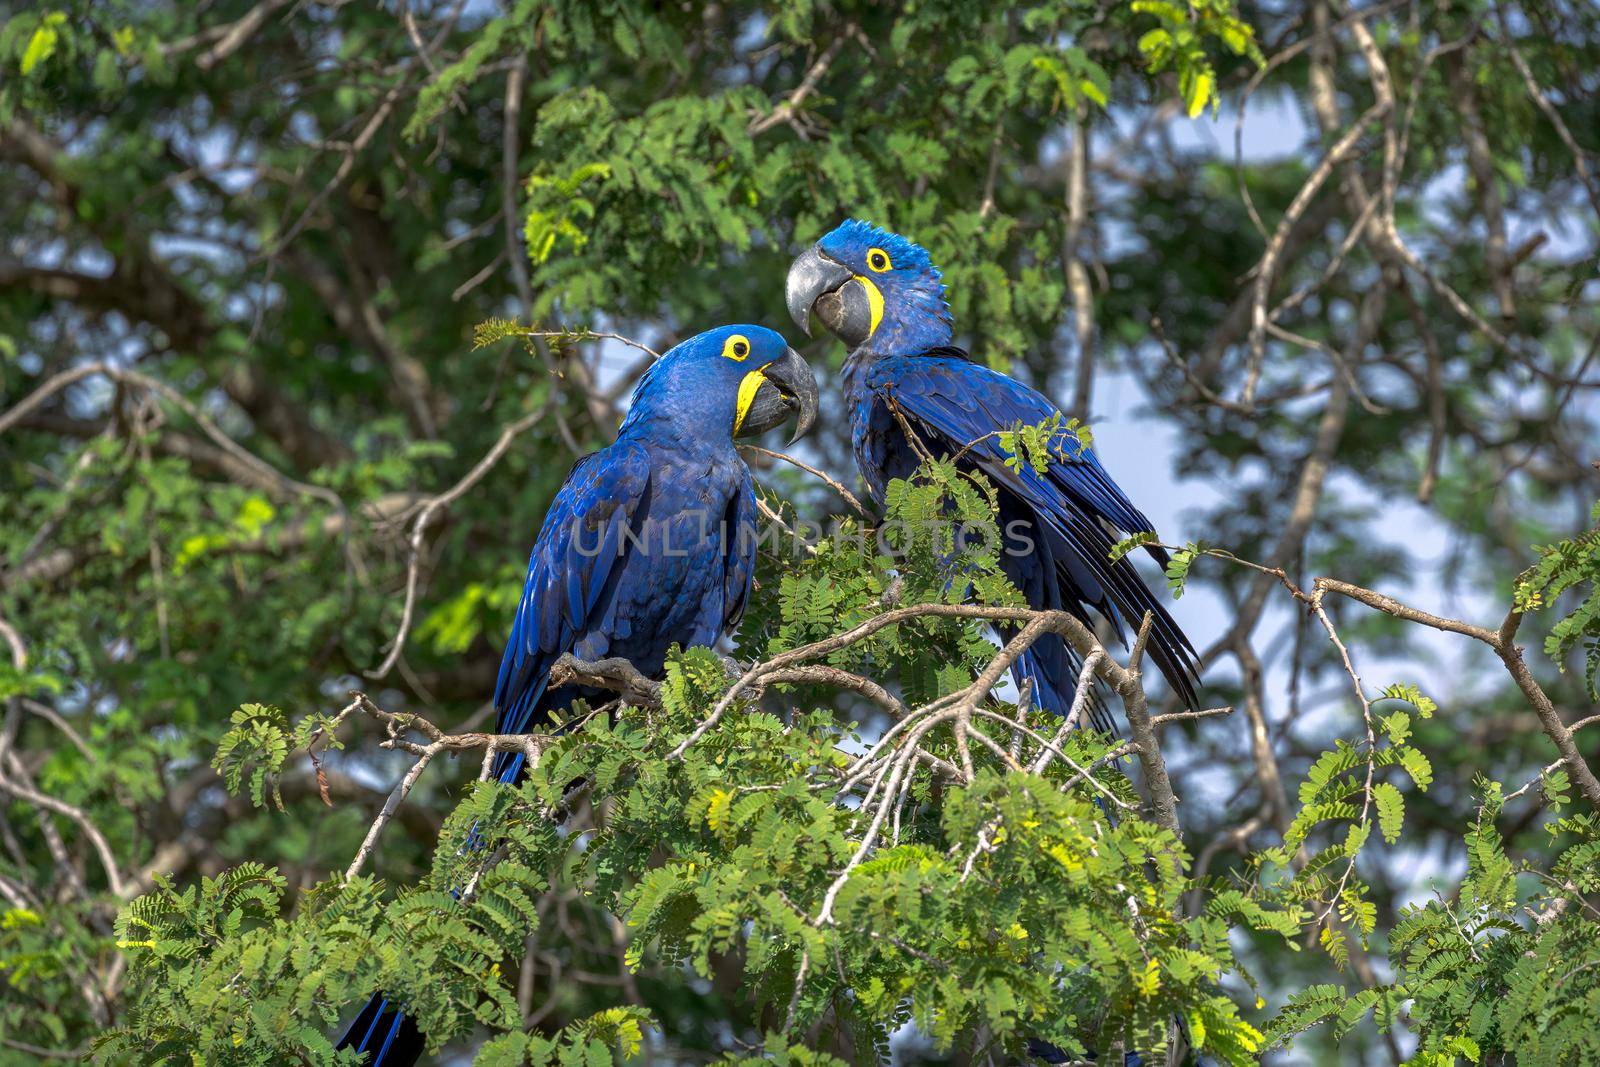 A pair of Hyacinth Macaws perching in a tree in Brazil by timo043850